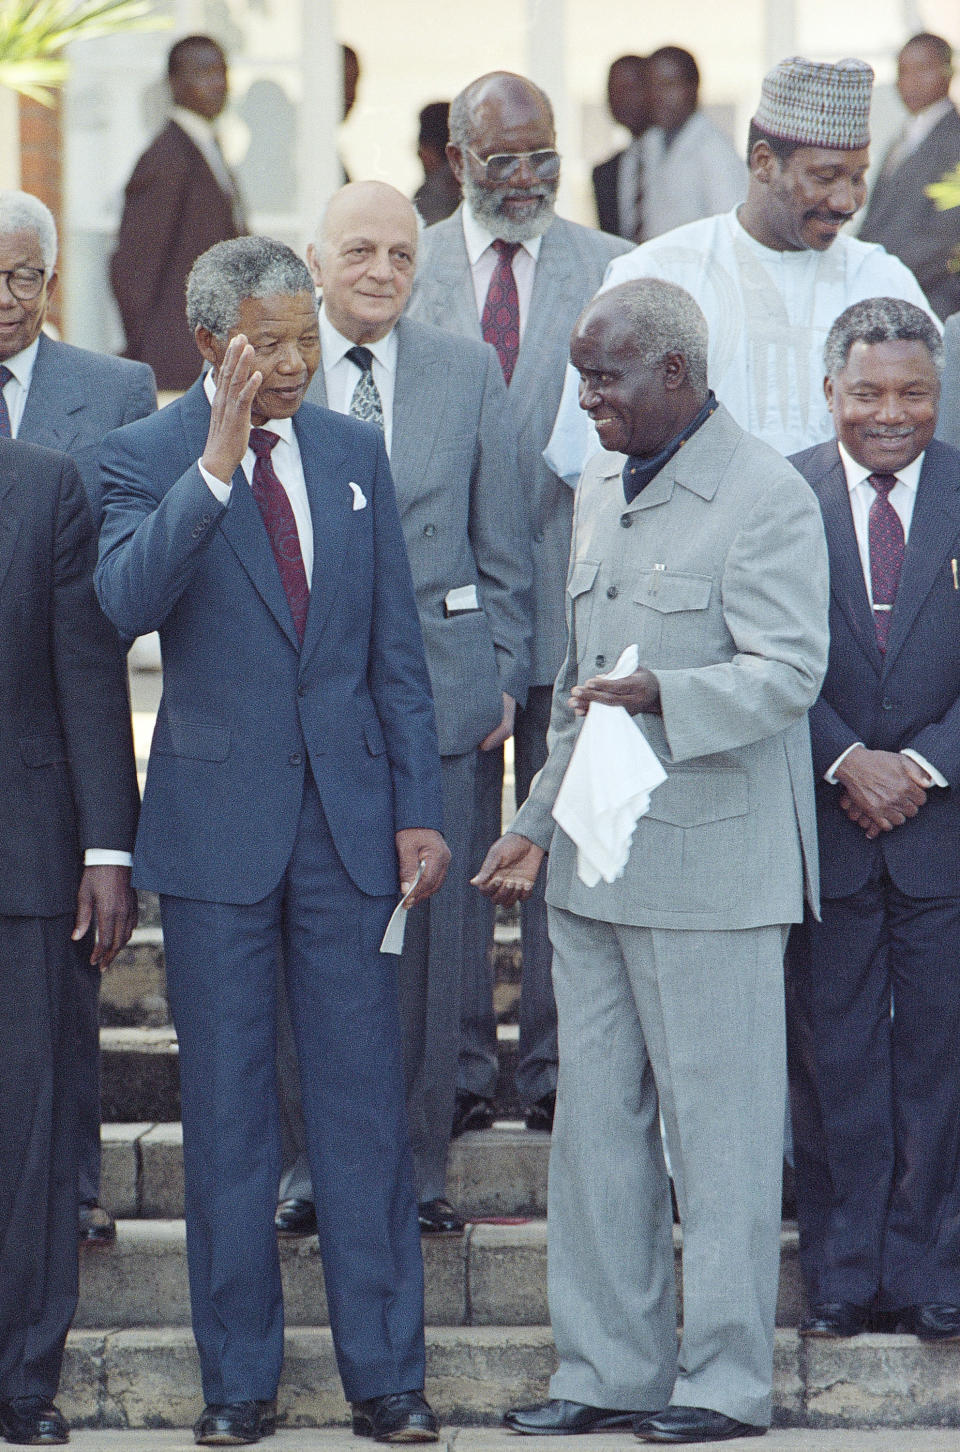 FILE - In this Feb. 28, 1990 file photo, South Africa's Nelson Mandela, left, joins Zambia President Kenneth Kaunda in Lusaka, after meeting with seven African Presidents and commonwealth leaders. Zambia’s first president Kenneth Kaunda has died at the age of 97, the country's president Edward Lungu announced Thursday June 17, 2021. (AP Photo/John Parkin, File)